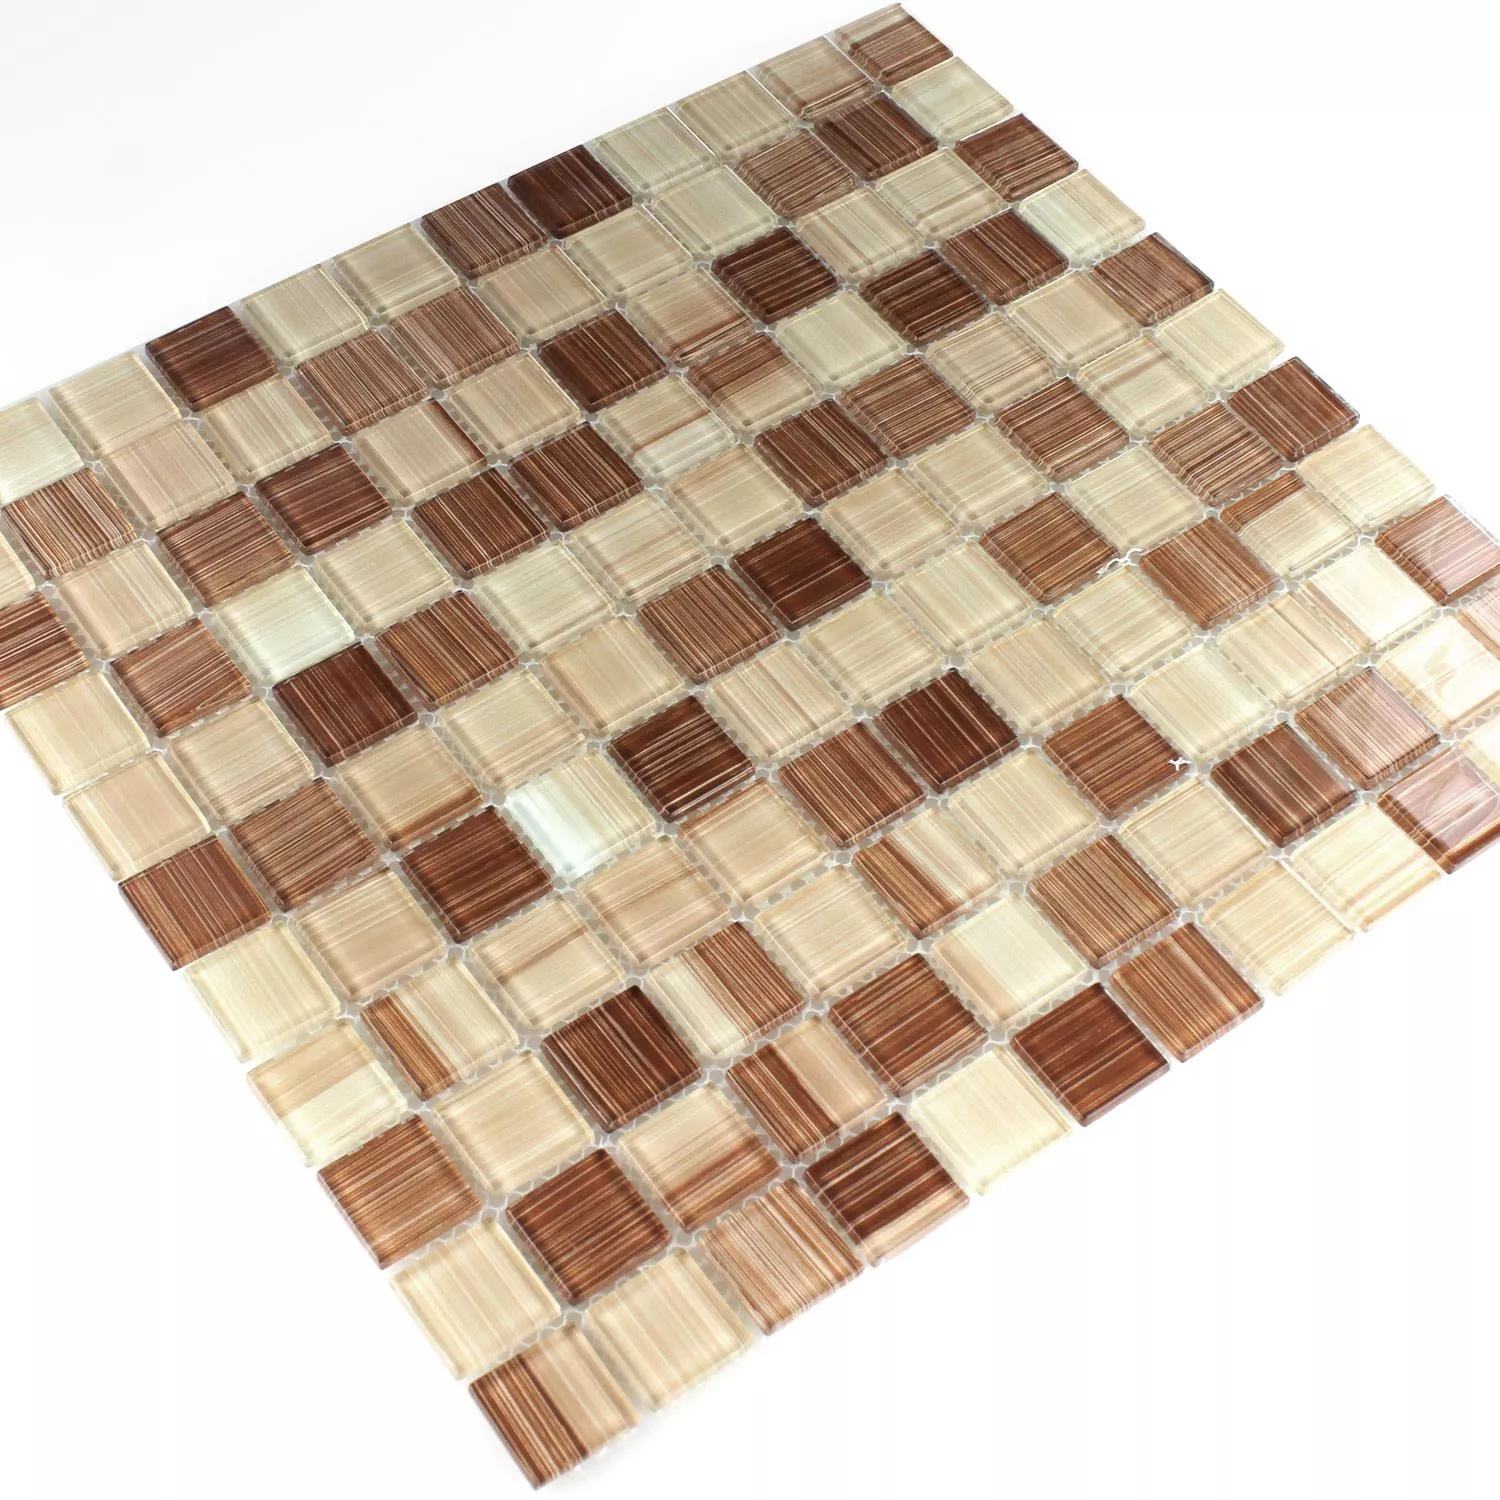 Striped Crystal Mosaic Tiles Glass Brown Beige Mix